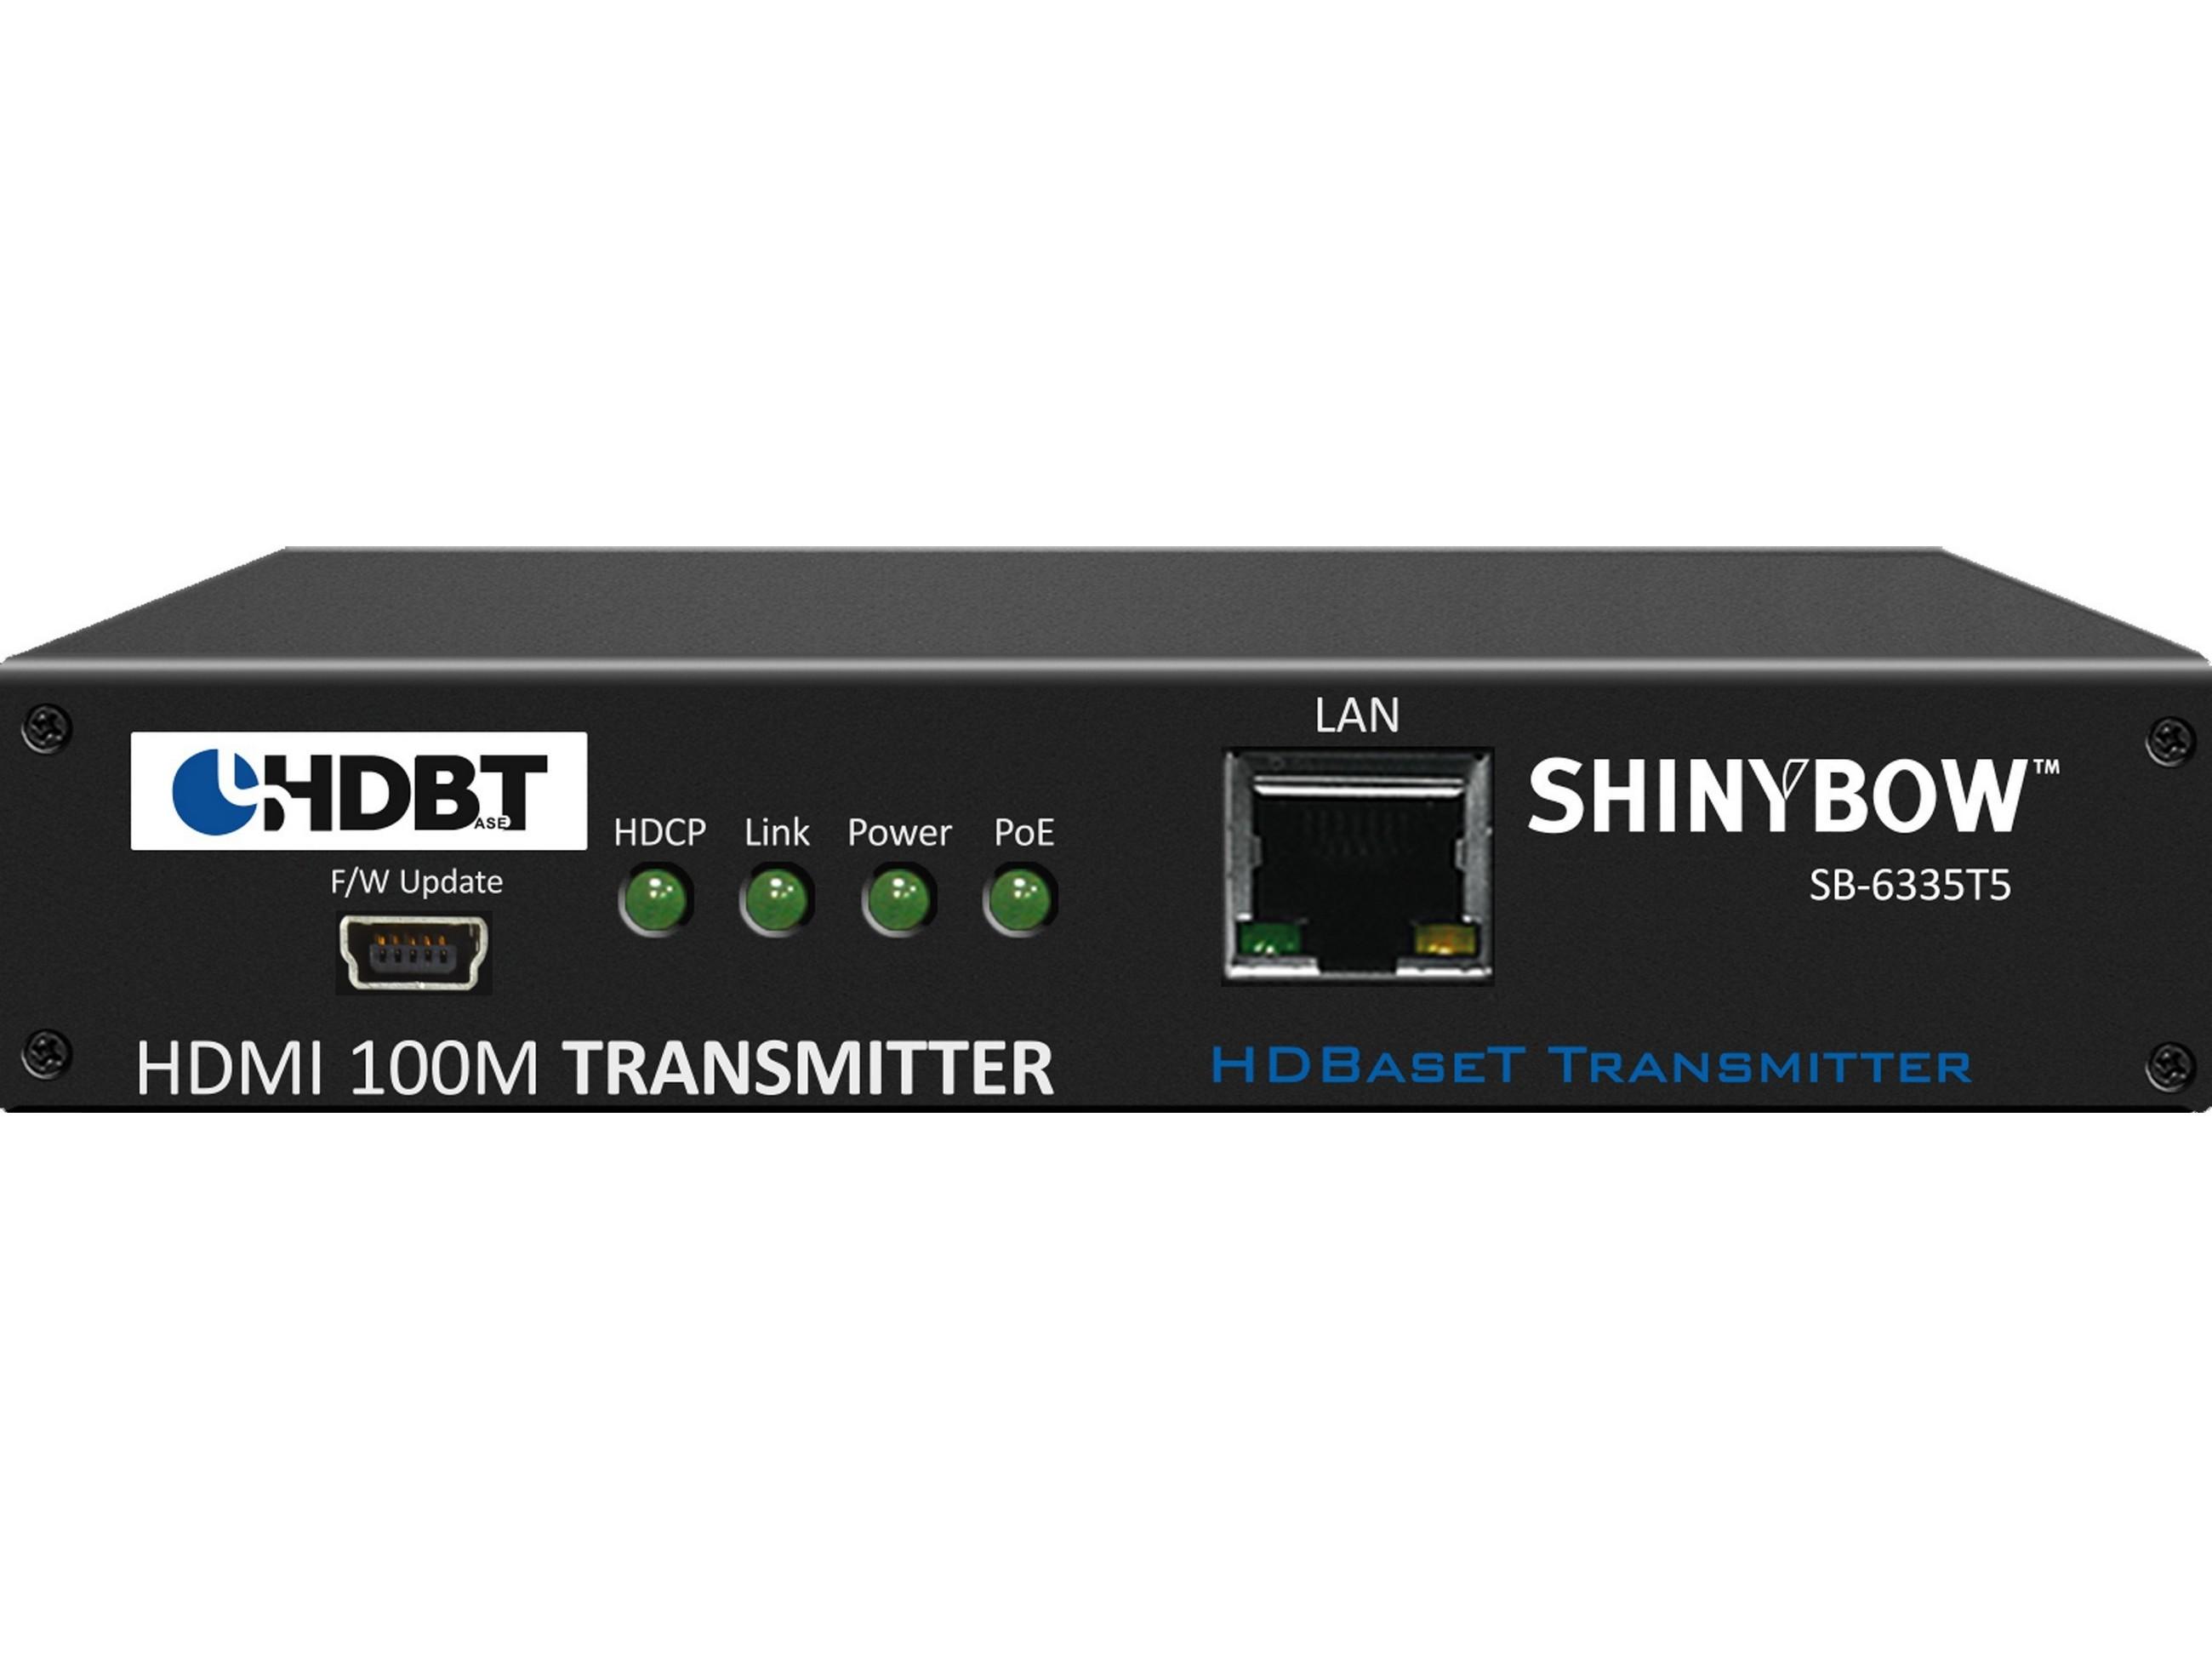 SB-6335T5-b 5 play HDBaseT PoH Extender (Transmitter) 330Ft with 2-way IR/RS-232 by Shinybow